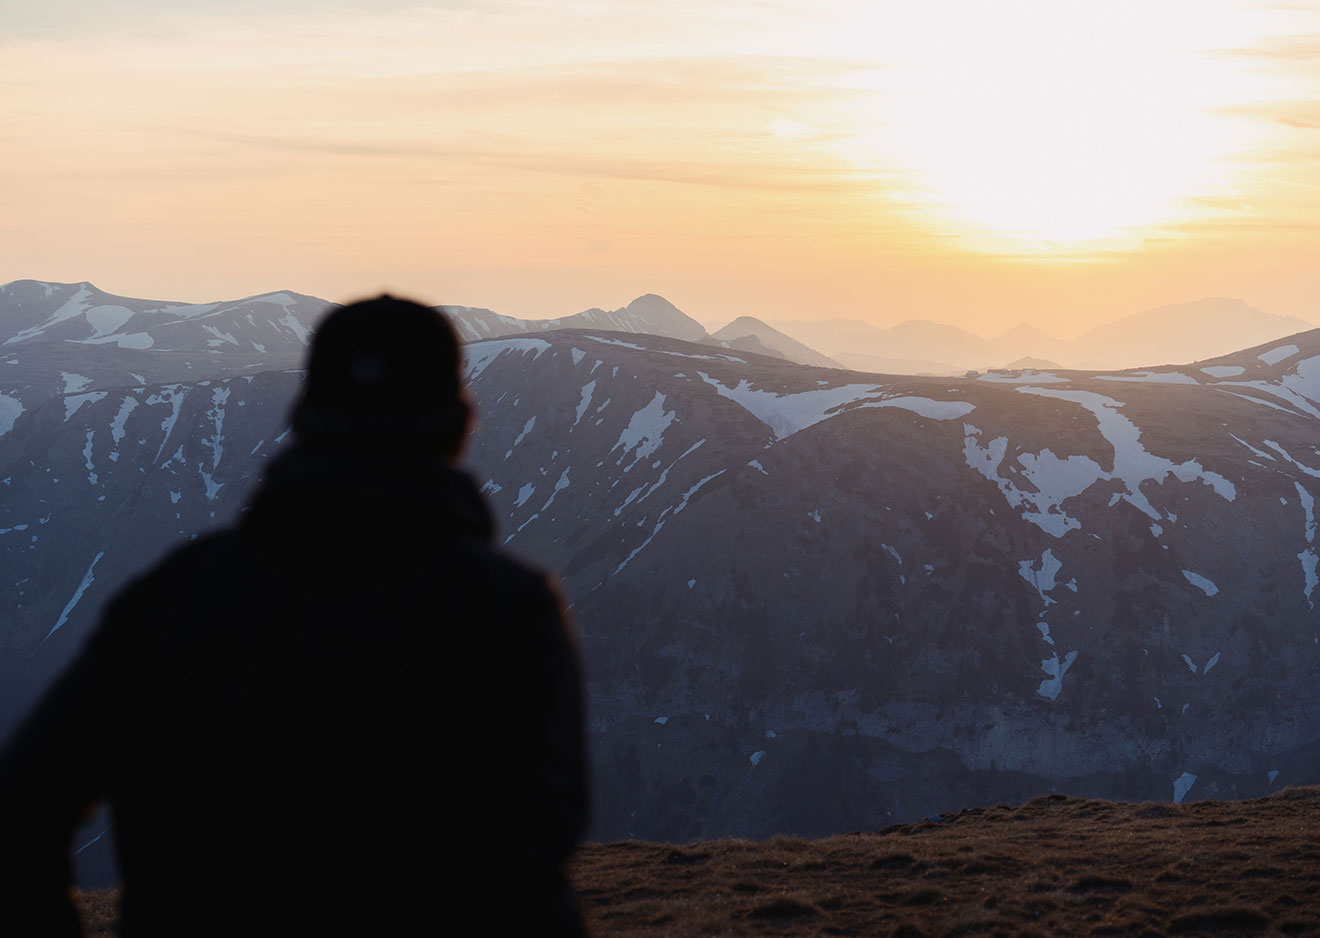 A mountaineer at the summit looking out at the rising sun